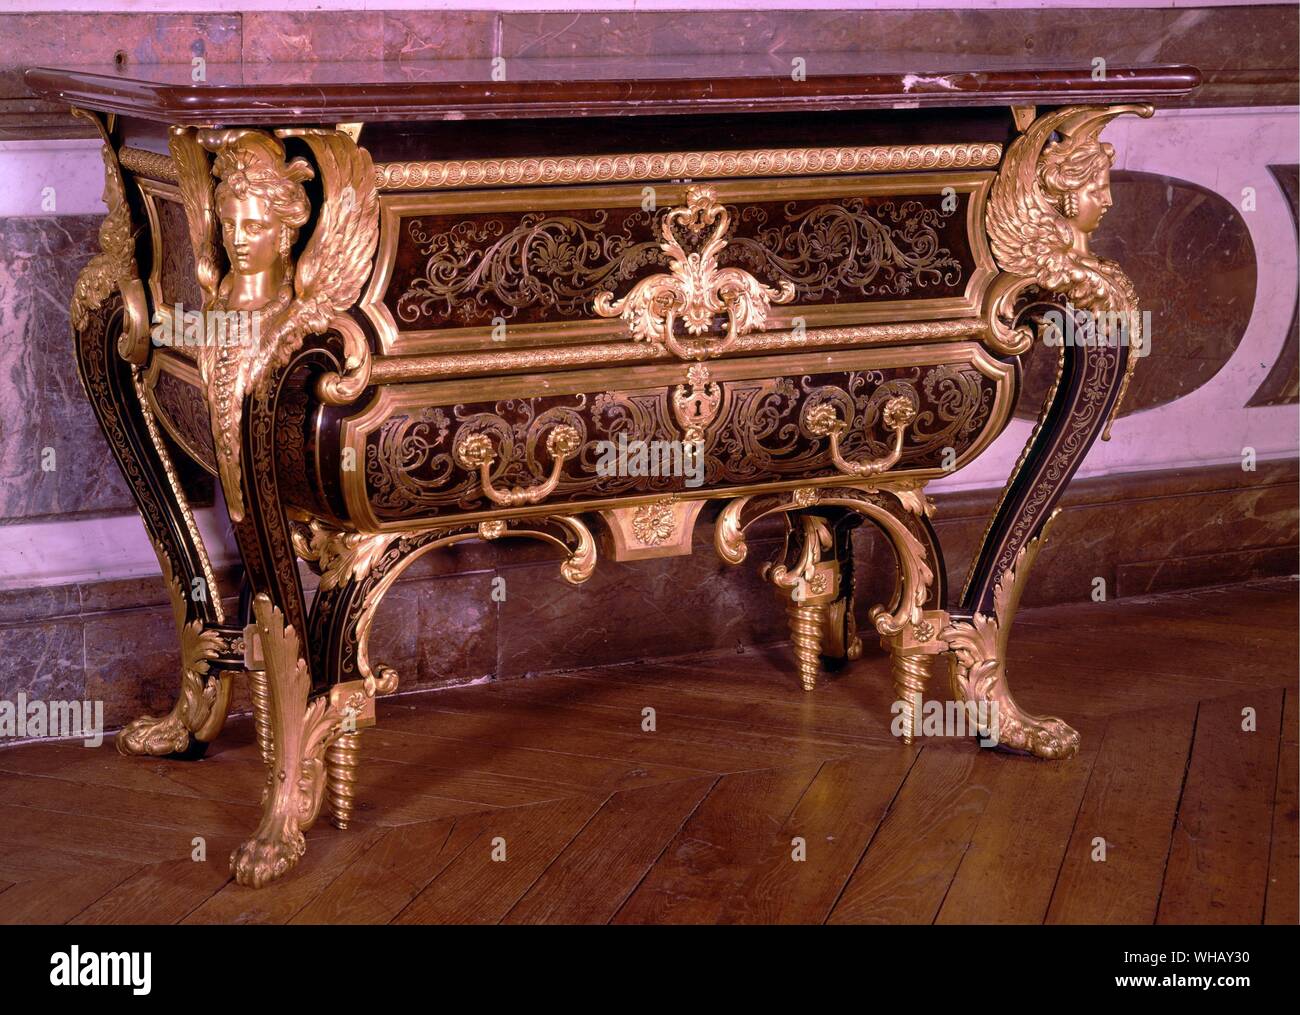 Boulle commode made for Louis XIV room at the Grand Trianon 1701. Rococo carving bowed legs, acanthus leaf decoration, french sphinxes at corners. The Sun King by Nancy Mitford, page 176.. The Grand Trianon is a royal villa situated to the north of the Palace of Versailles gardens, in France. The villa was built in 1687 as a retreat for King Louis XIV of France. Stock Photo